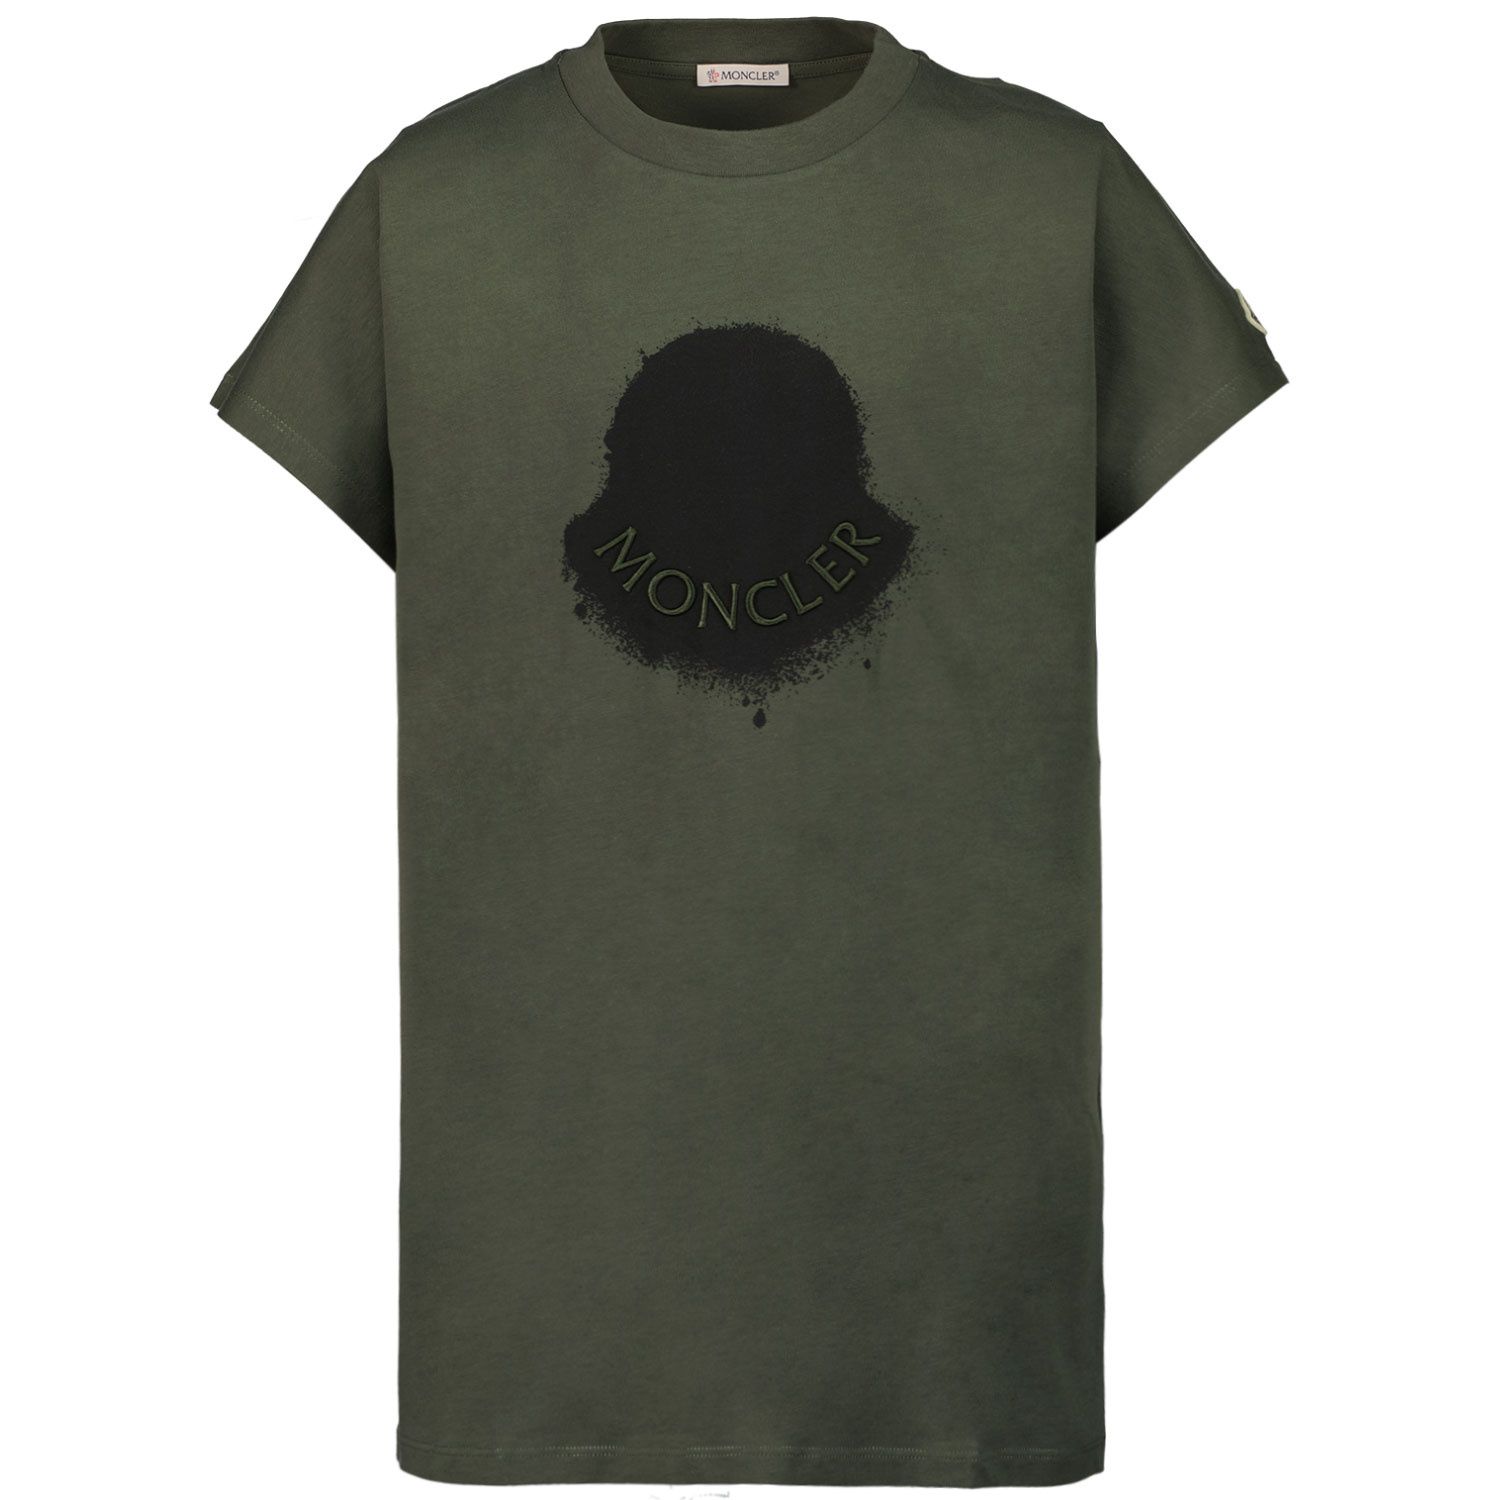 Picture of Moncler 8C00016 kids t-shirt green